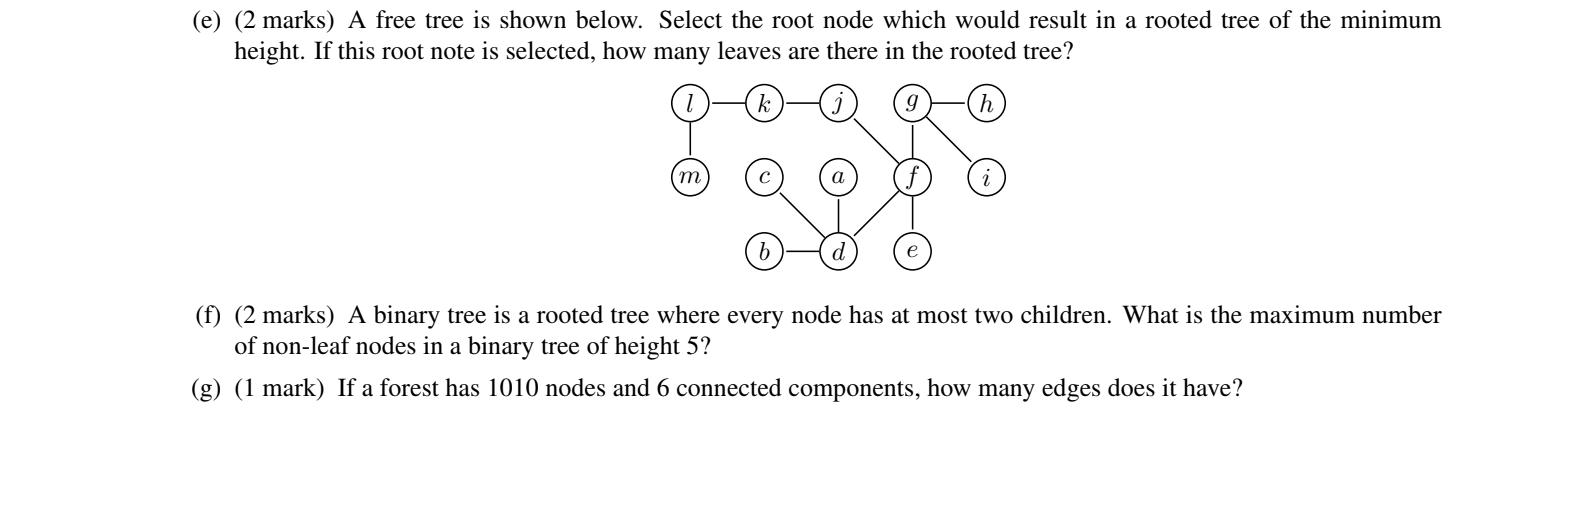 (e) (2 marks) A free tree is shown below. Select the root node which would result in a rooted tree of the